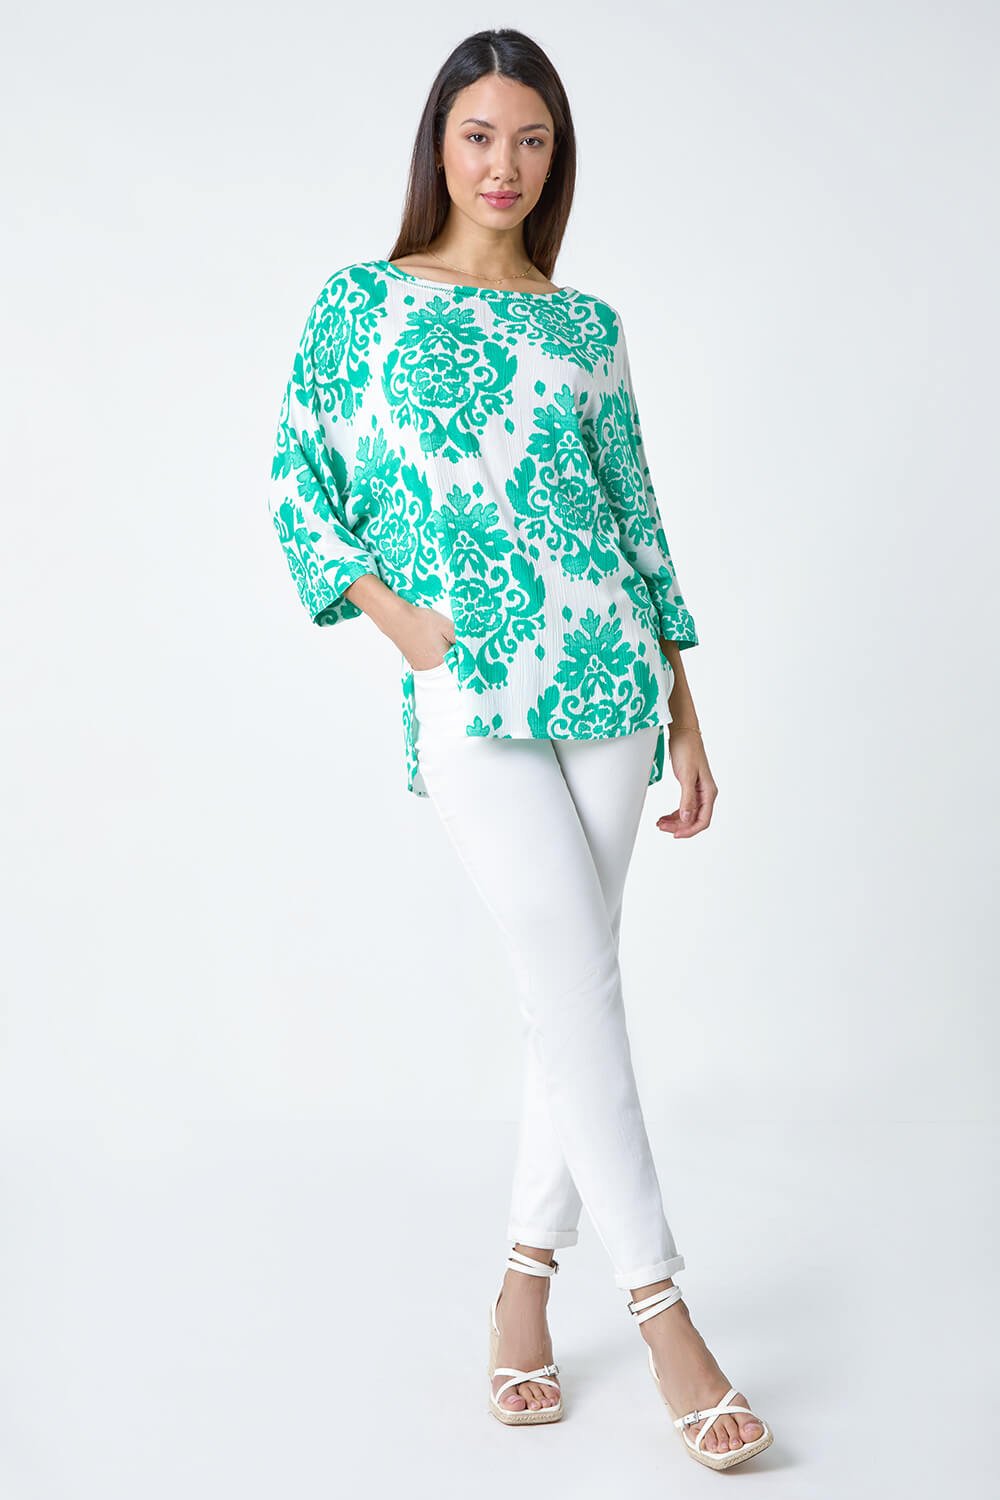 Green Textured Paisley Print Tunic Top, Image 2 of 5